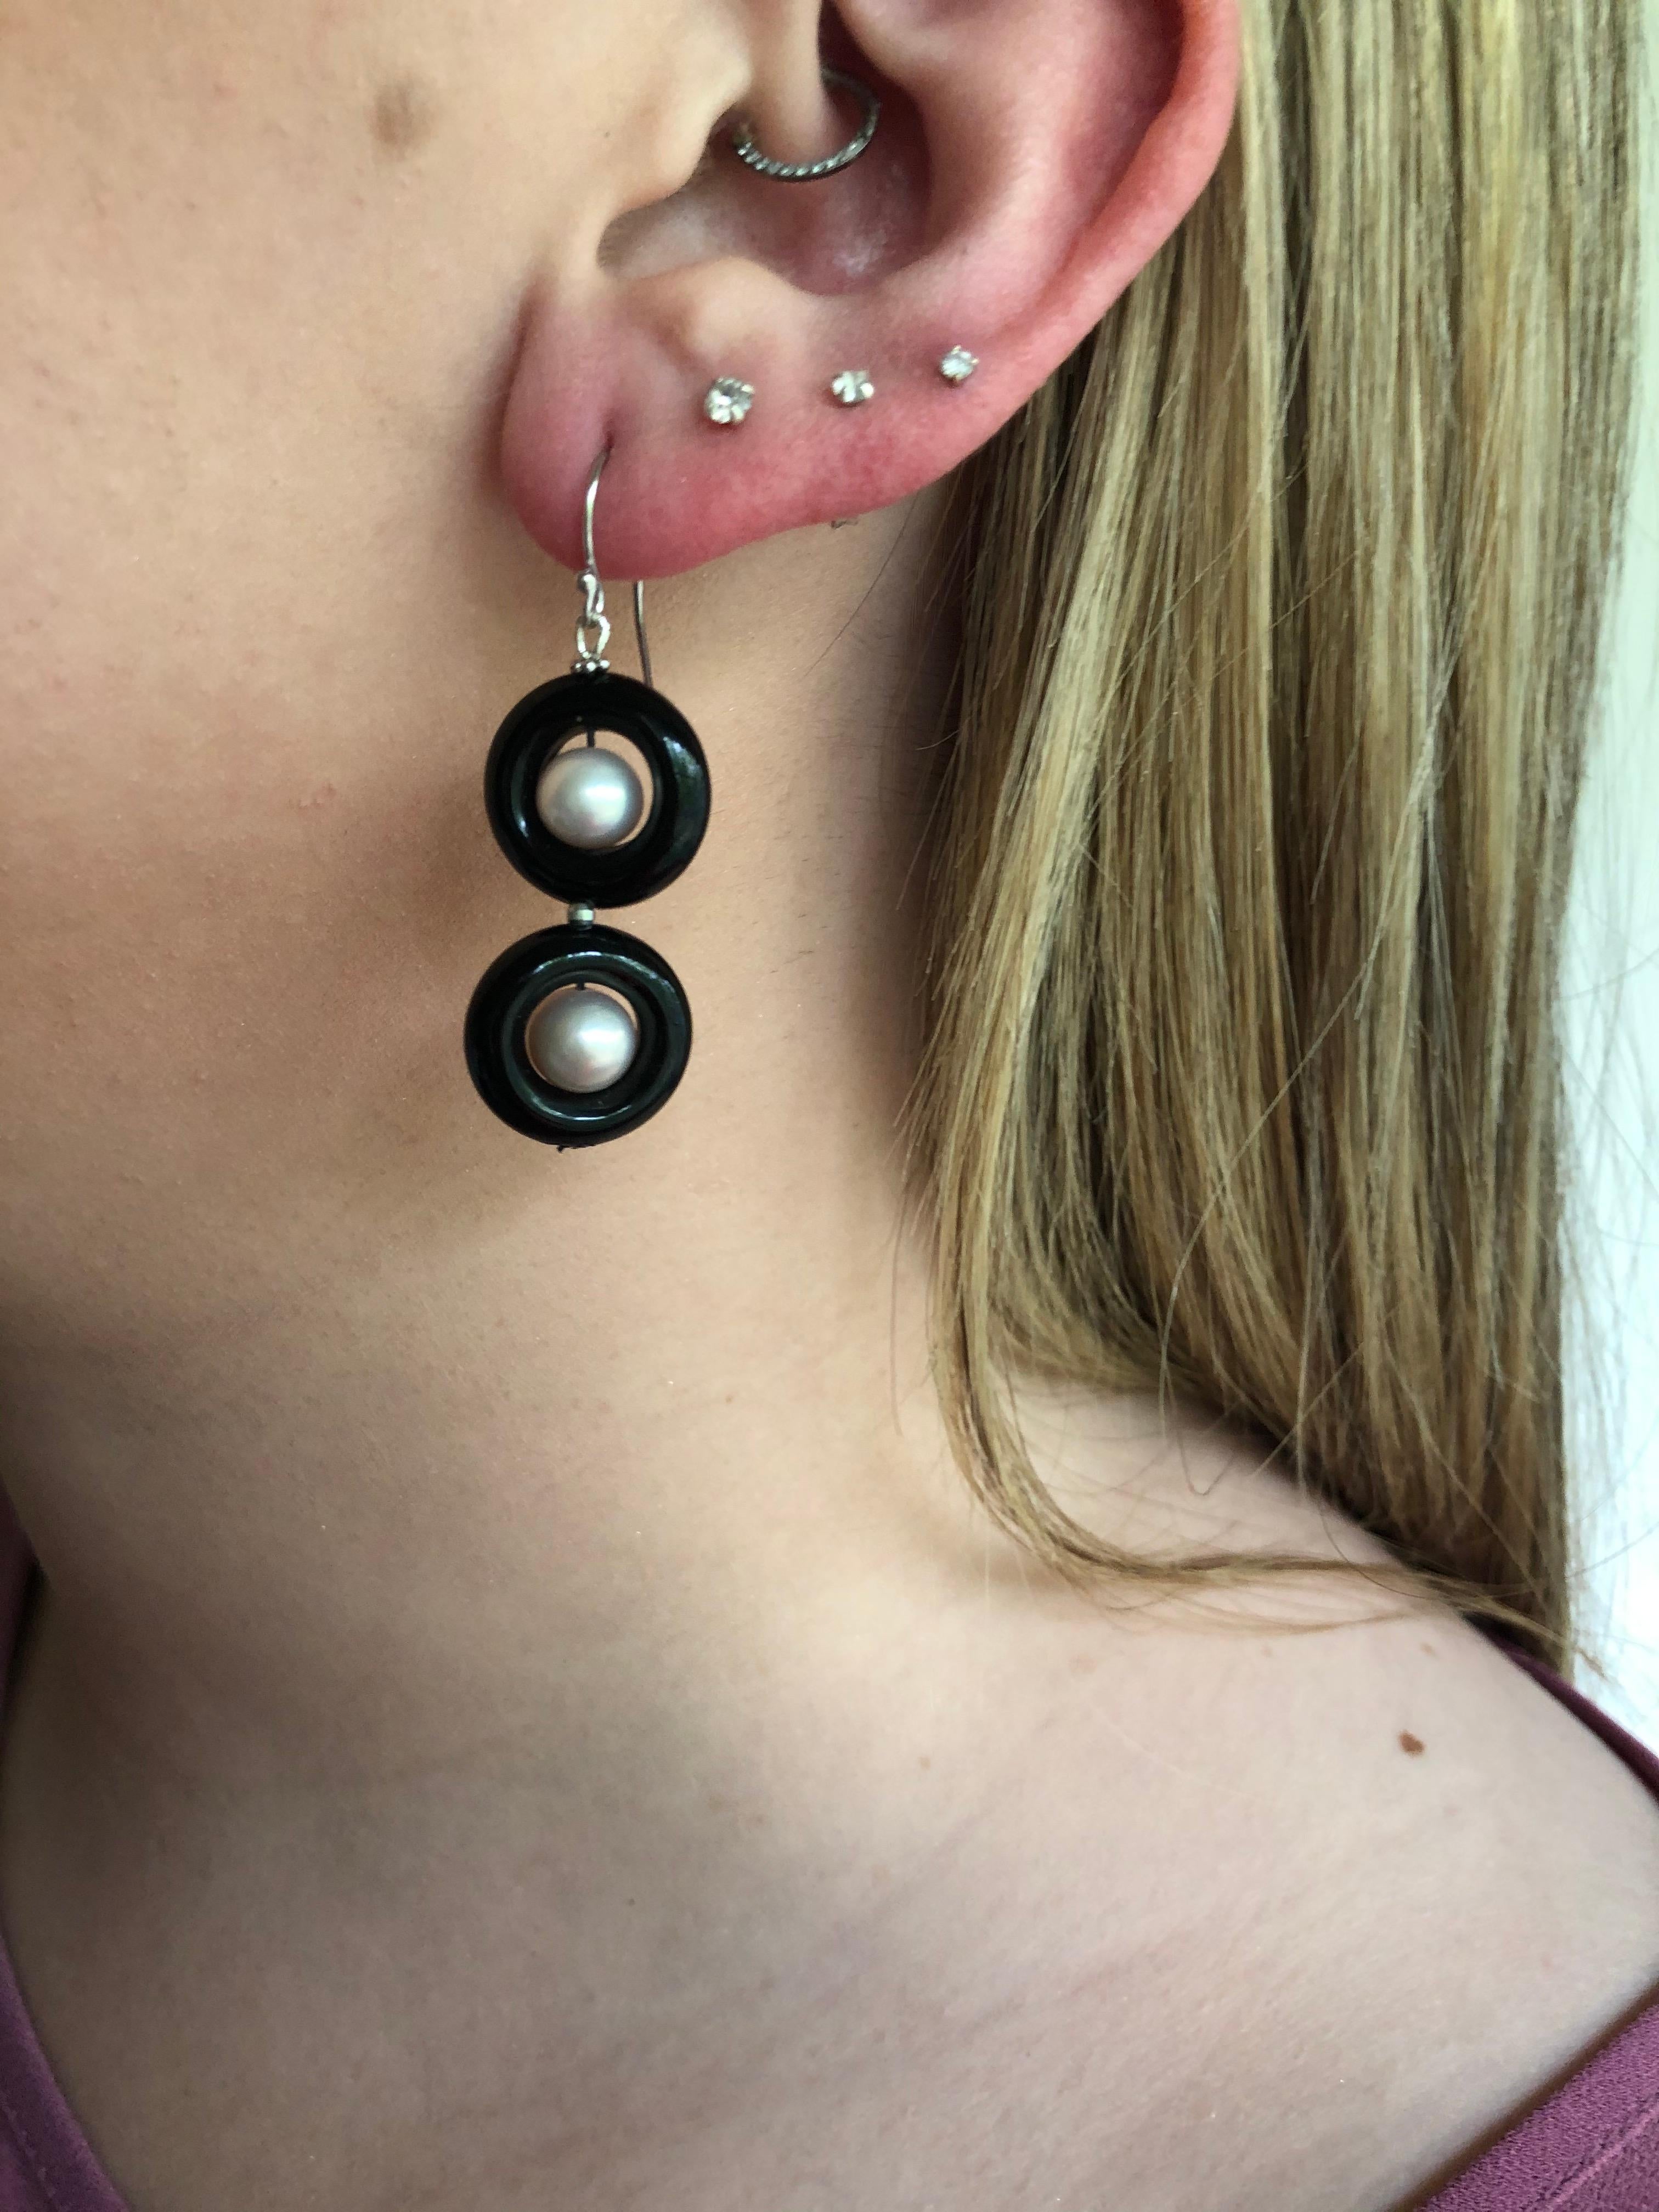 These classic double black onyx and pearl earrings with 14 k yellow gold lever-back and wiring are elegant and bold. The onyx rings contrast with the glowing white pearls beautifully making, what could have been simple earrings dramatic and